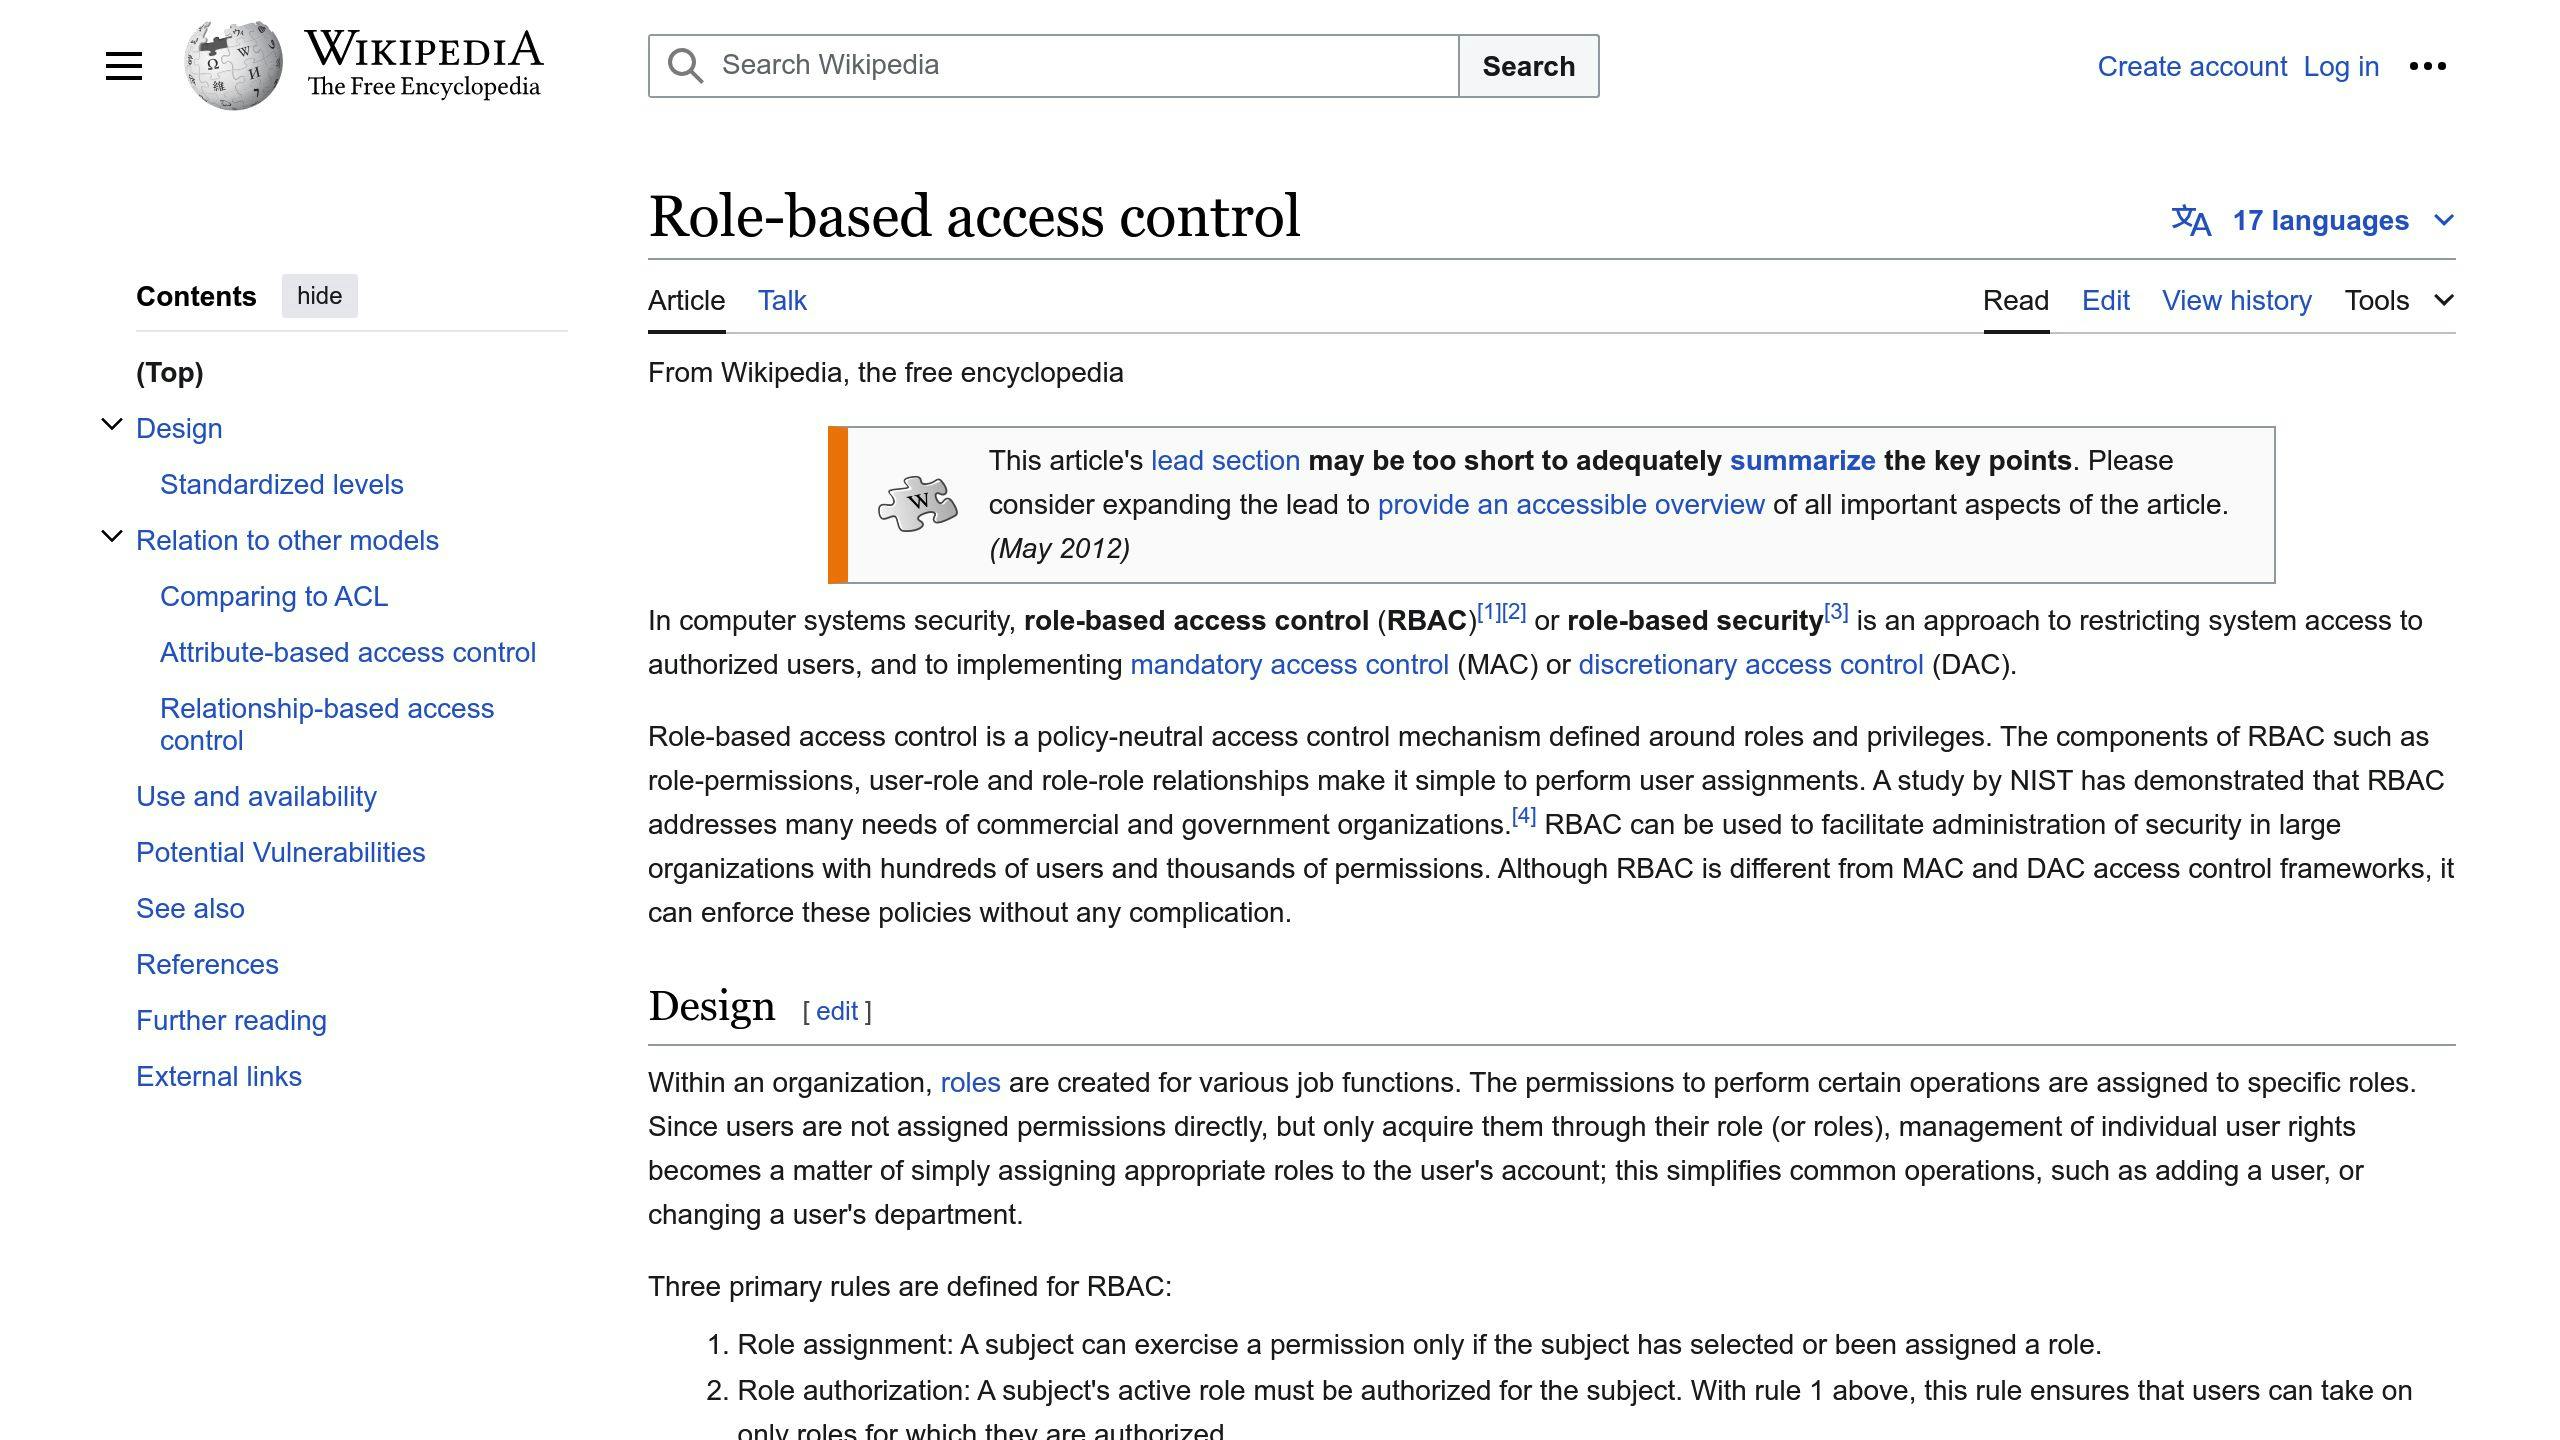 Role-Based Access Control